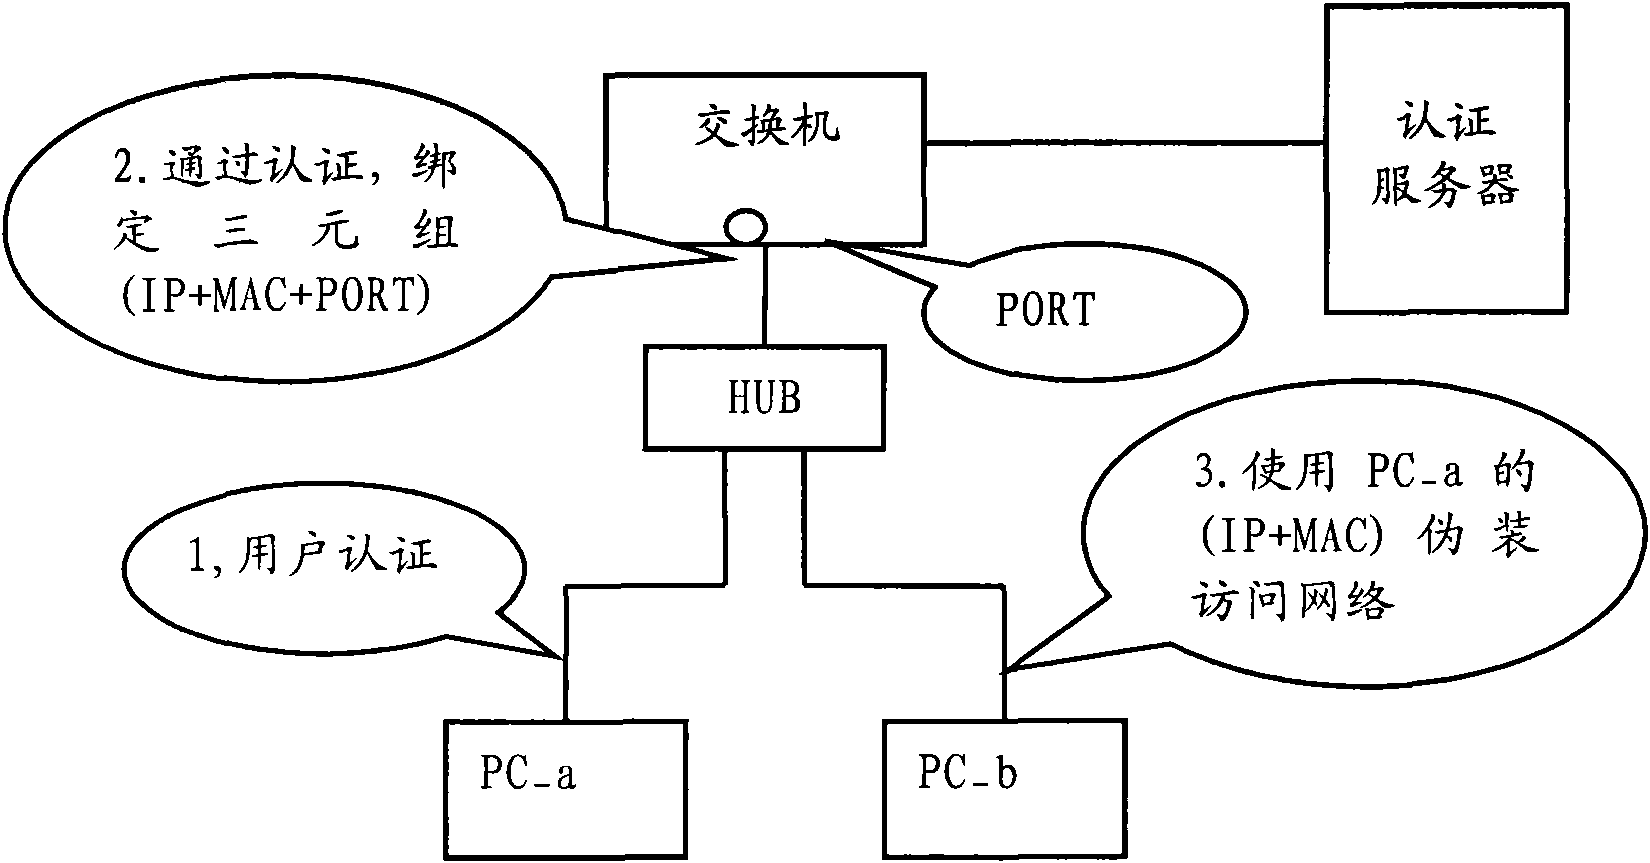 User identifying method and device for internet connection sharing